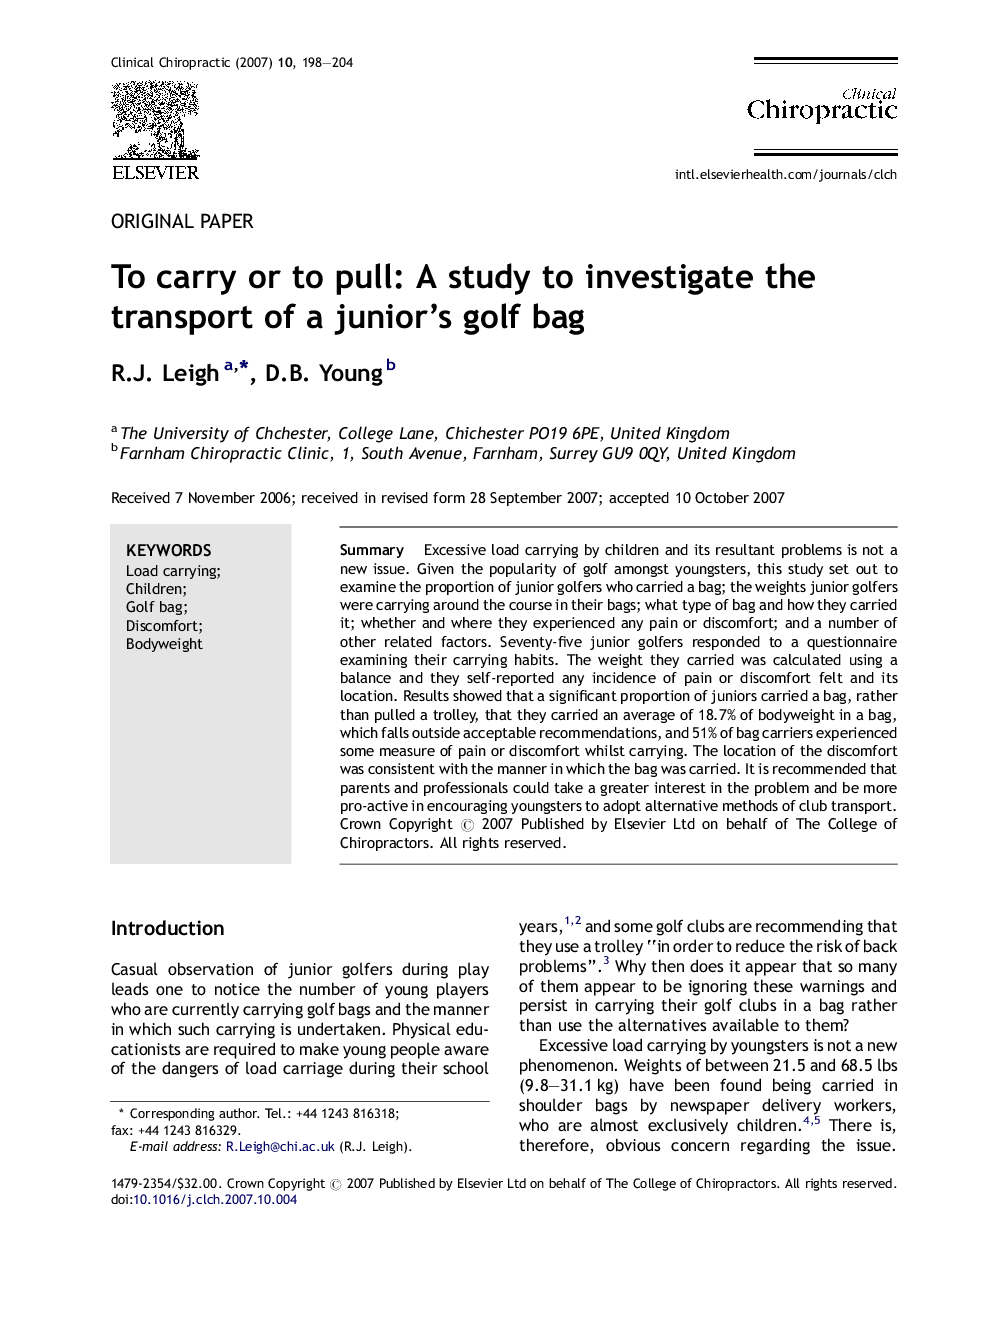 To carry or to pull: A study to investigate the transport of a junior's golf bag